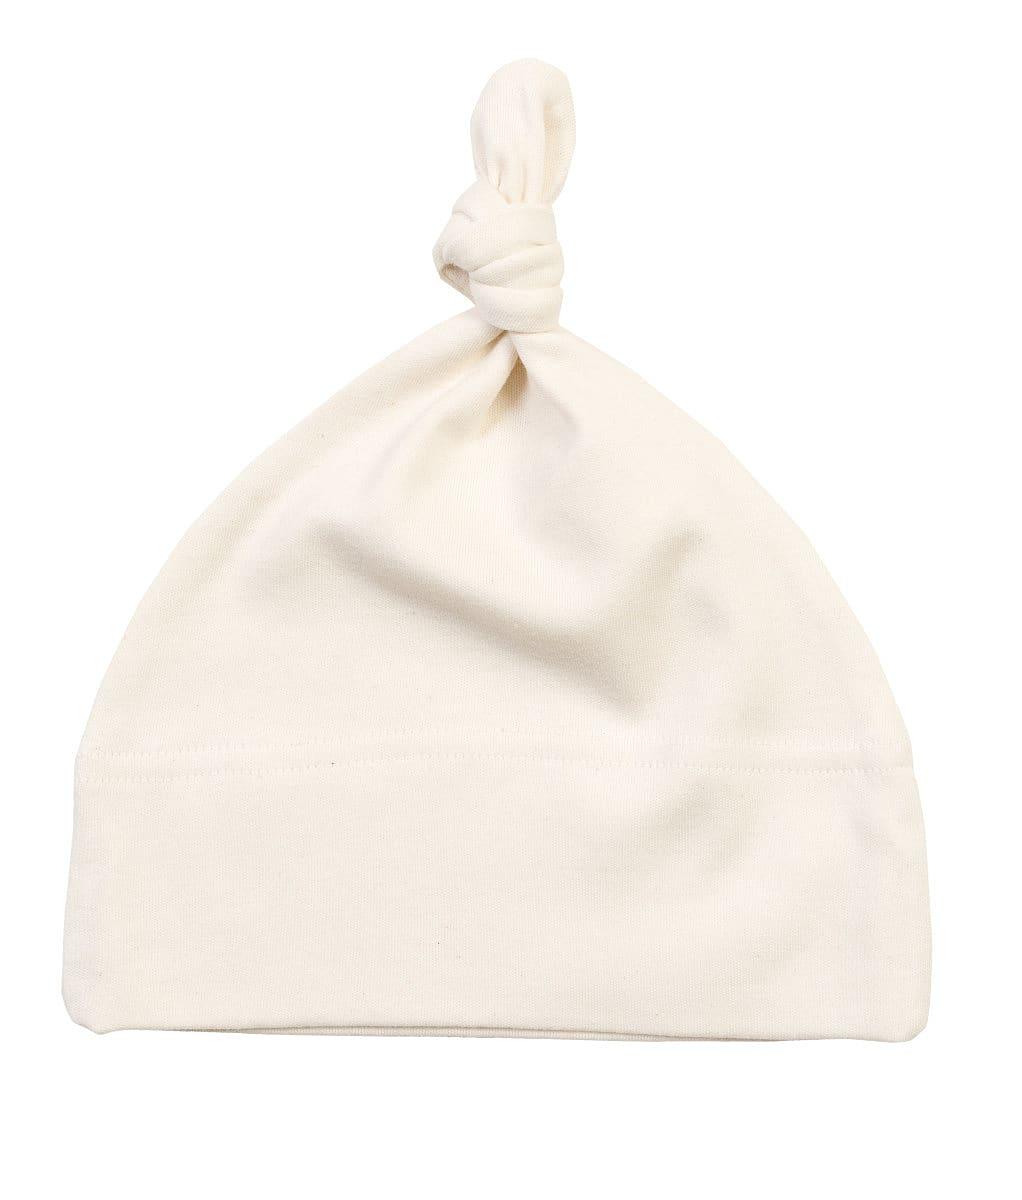 Babybugz 1 Knot Hat in Organic Natural (Product Code: BZ15)